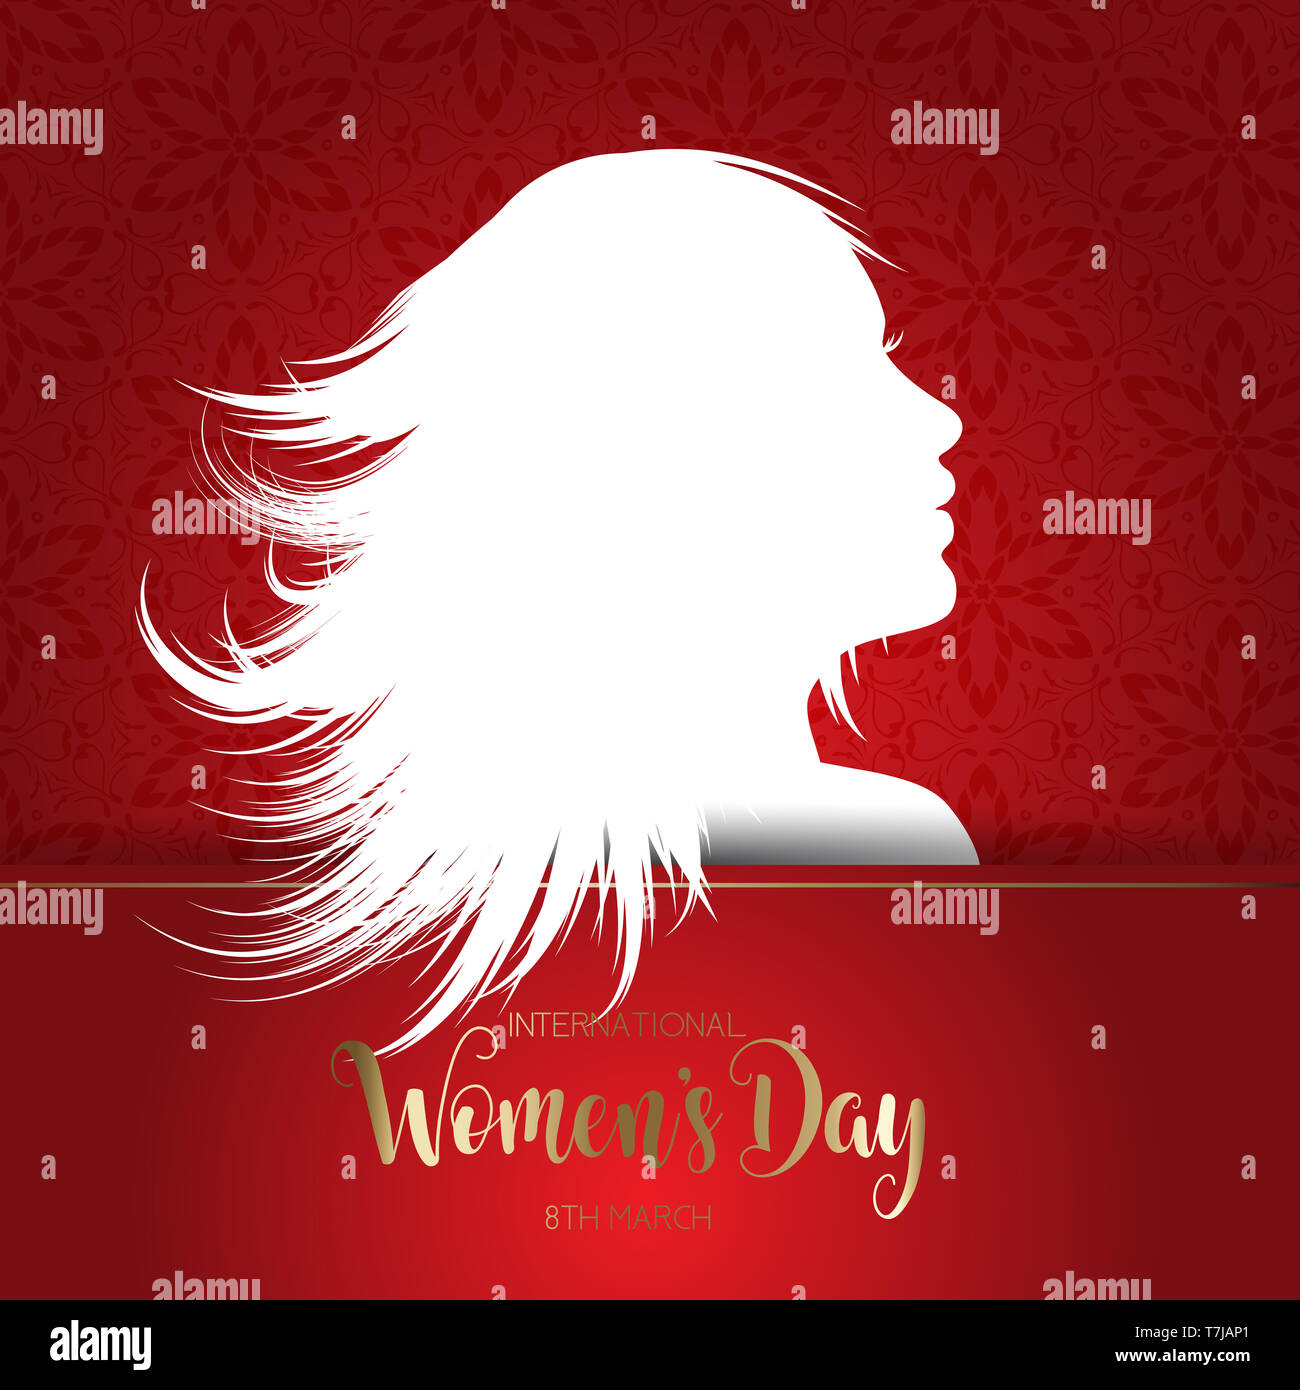 International Women's Day background with silhouette of female face Stock  Photo - Alamy